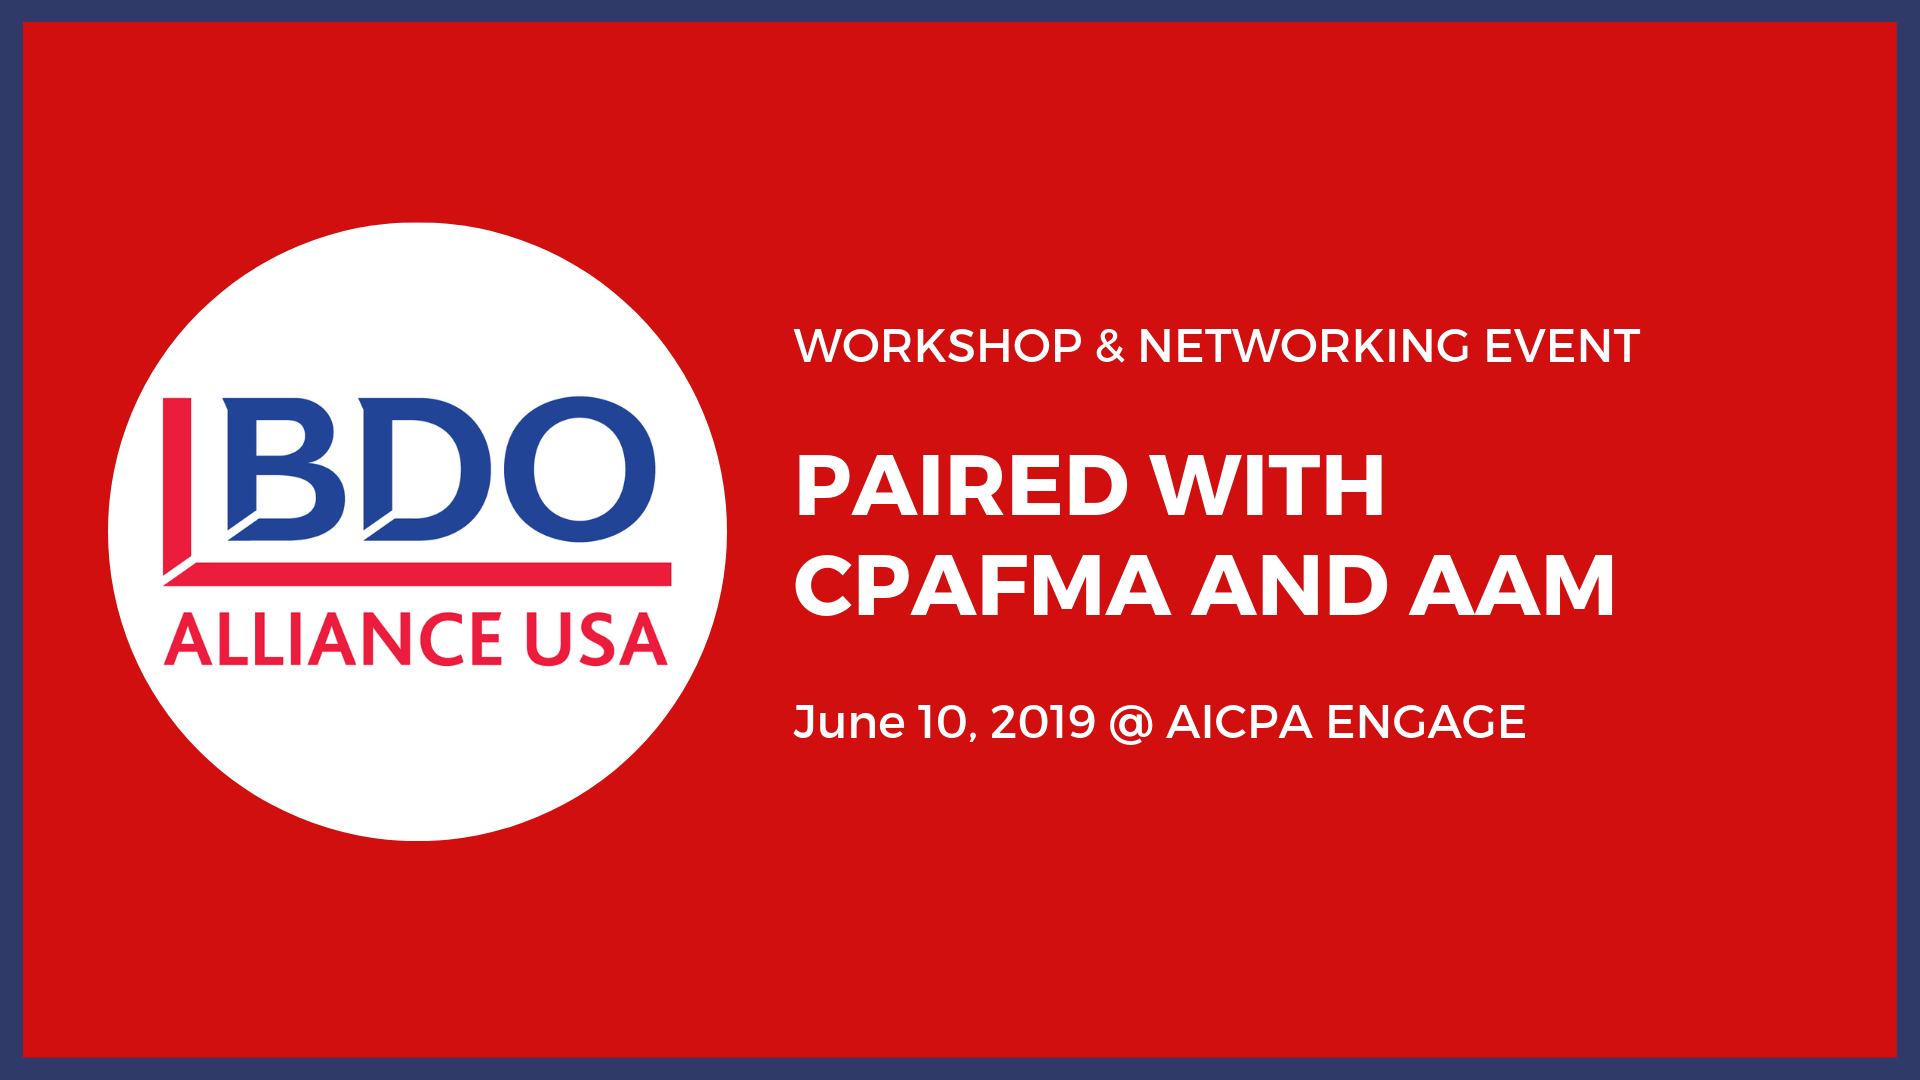 BDO Alliance Workshop and Networking Event Held with CPAFMA National Practice Management Conference